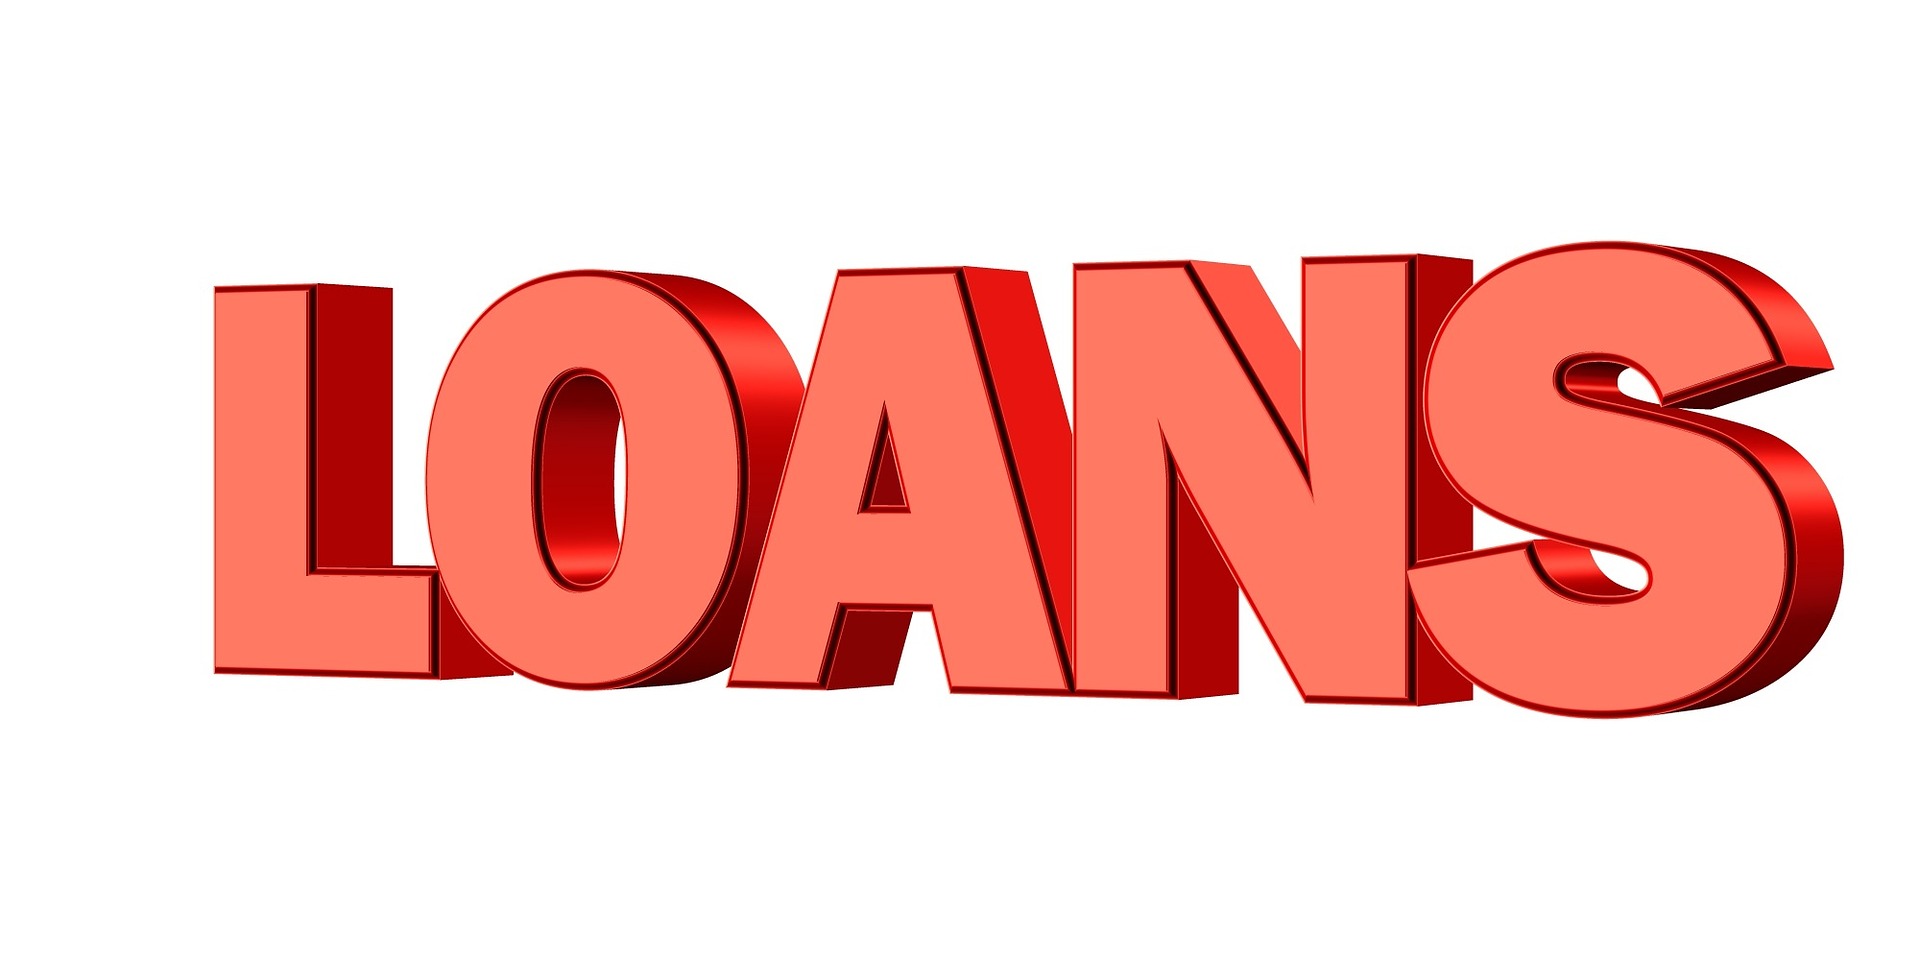 Personal loans explained